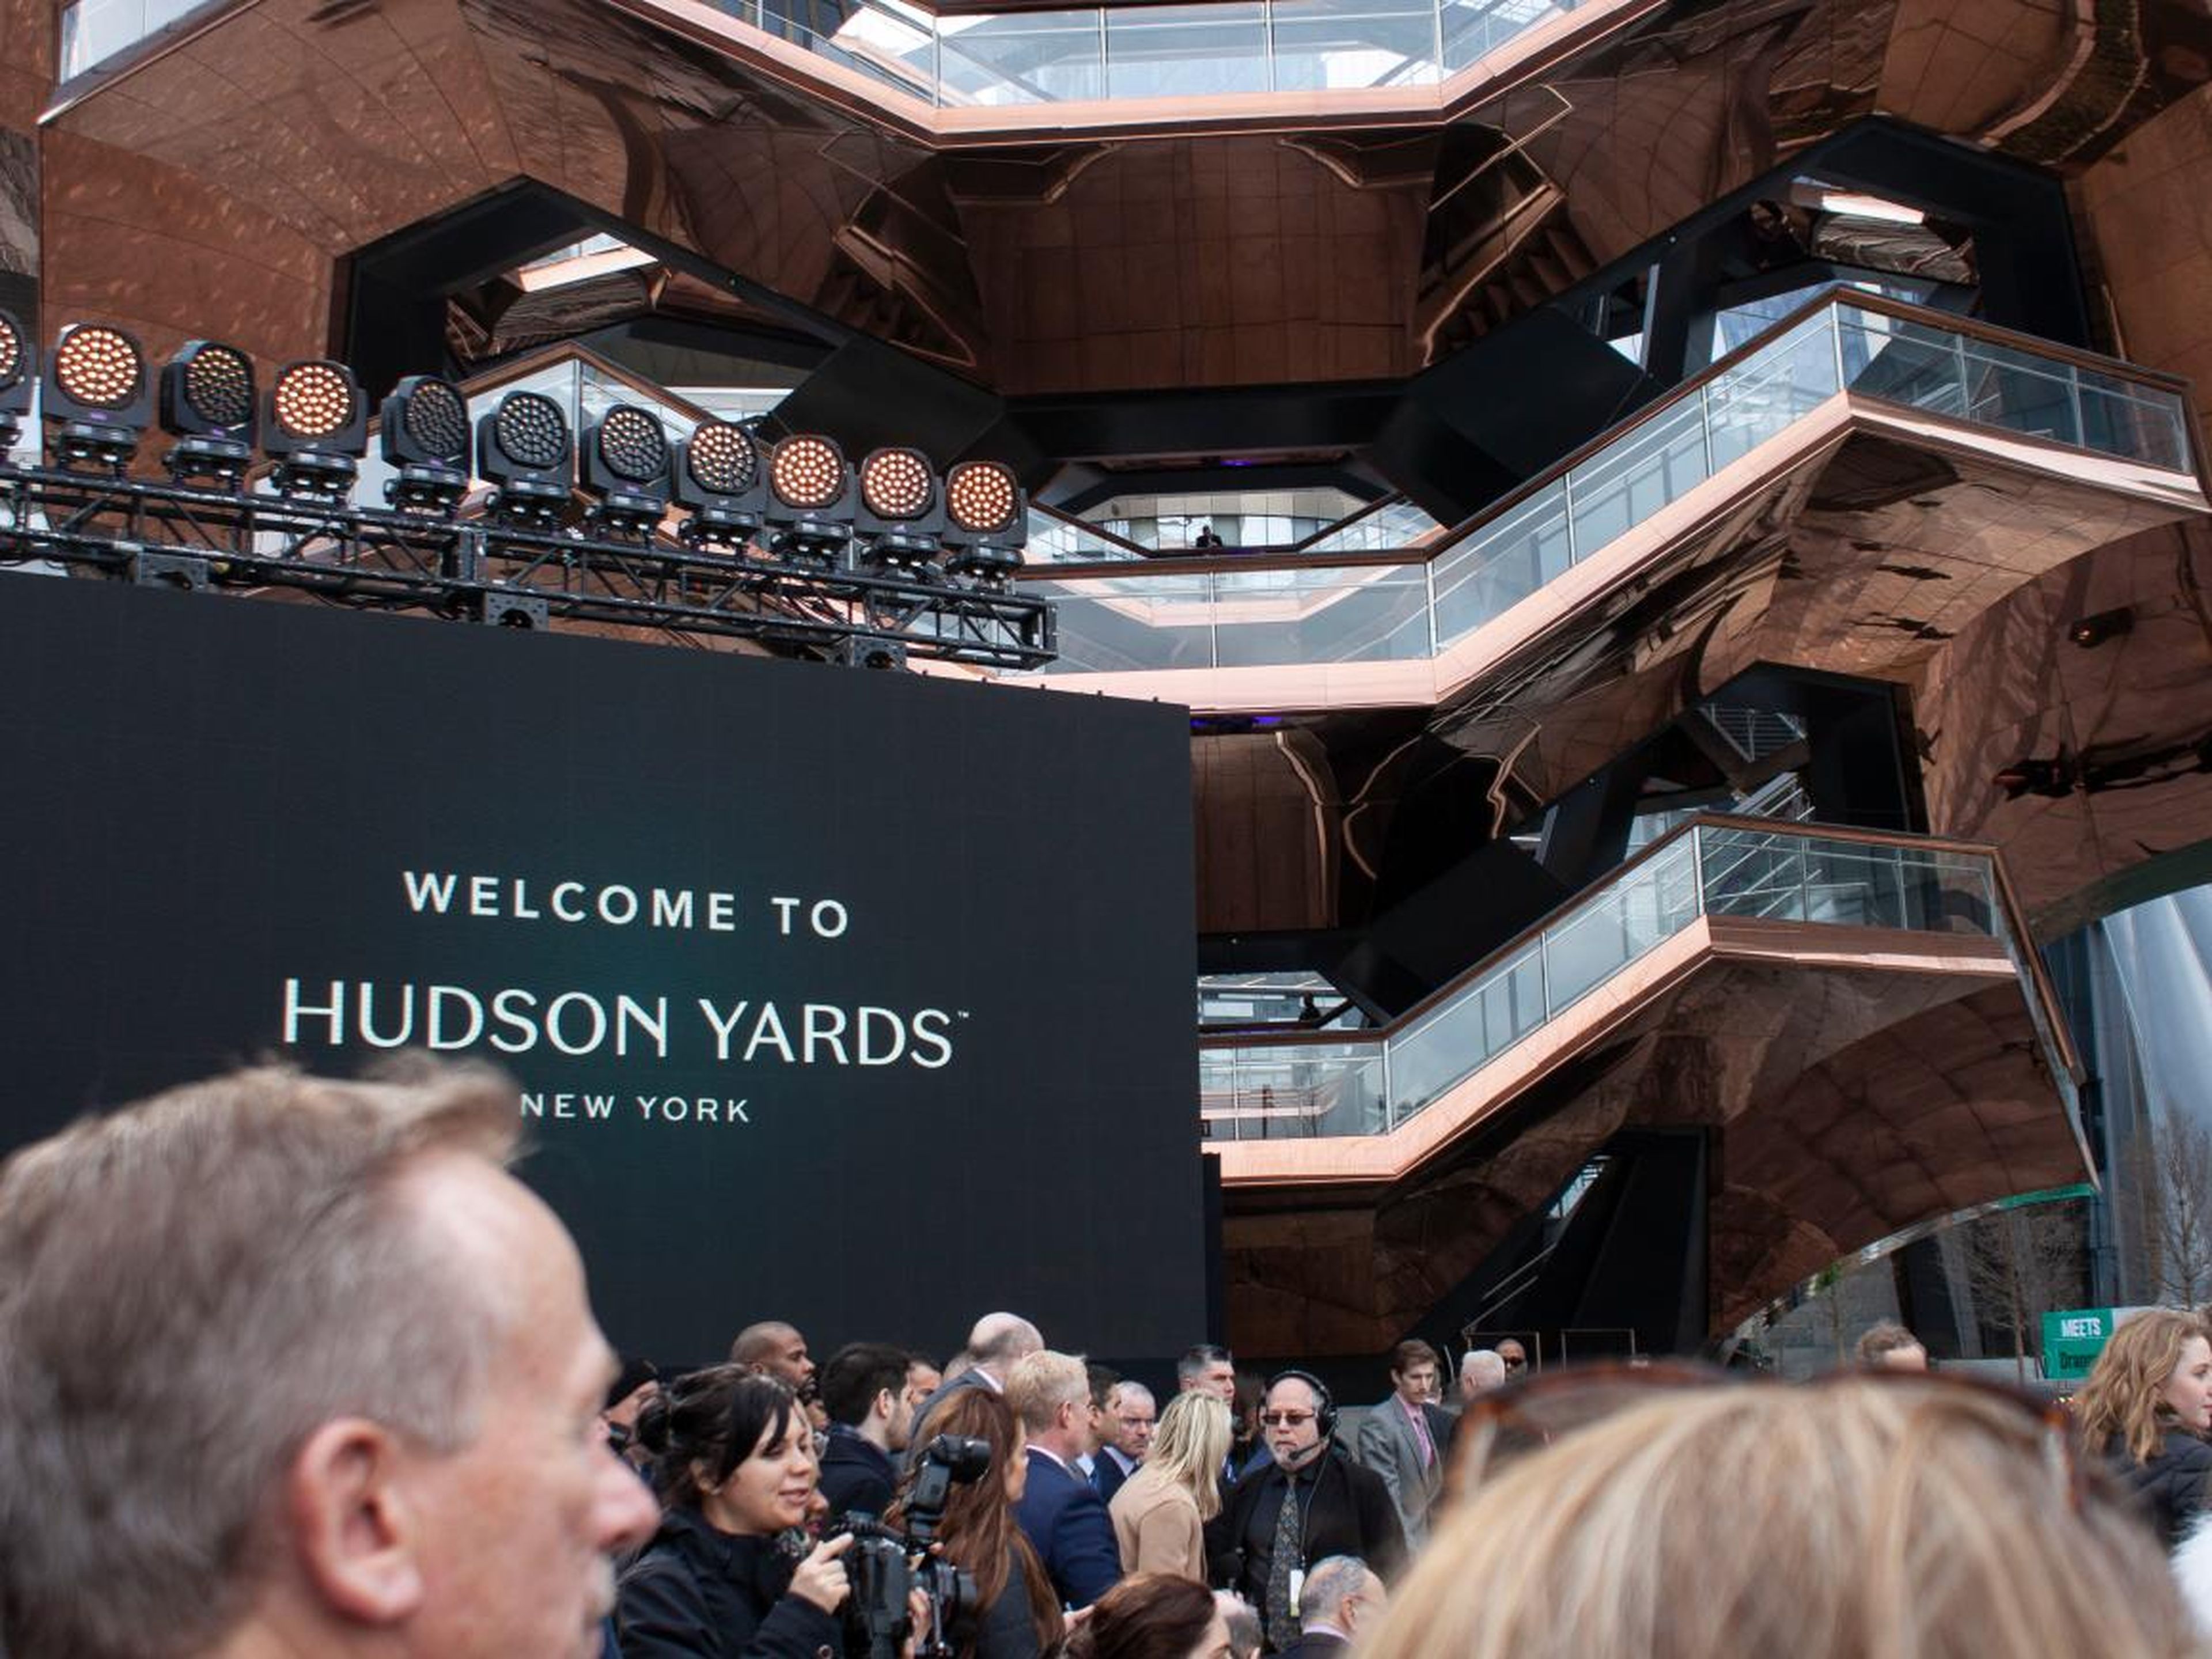 People gathered in Hudson Yards' central plaza for the morning's opening event. Chairs and a stage were set up for the planned performances and speeches from notable New Yorkers.